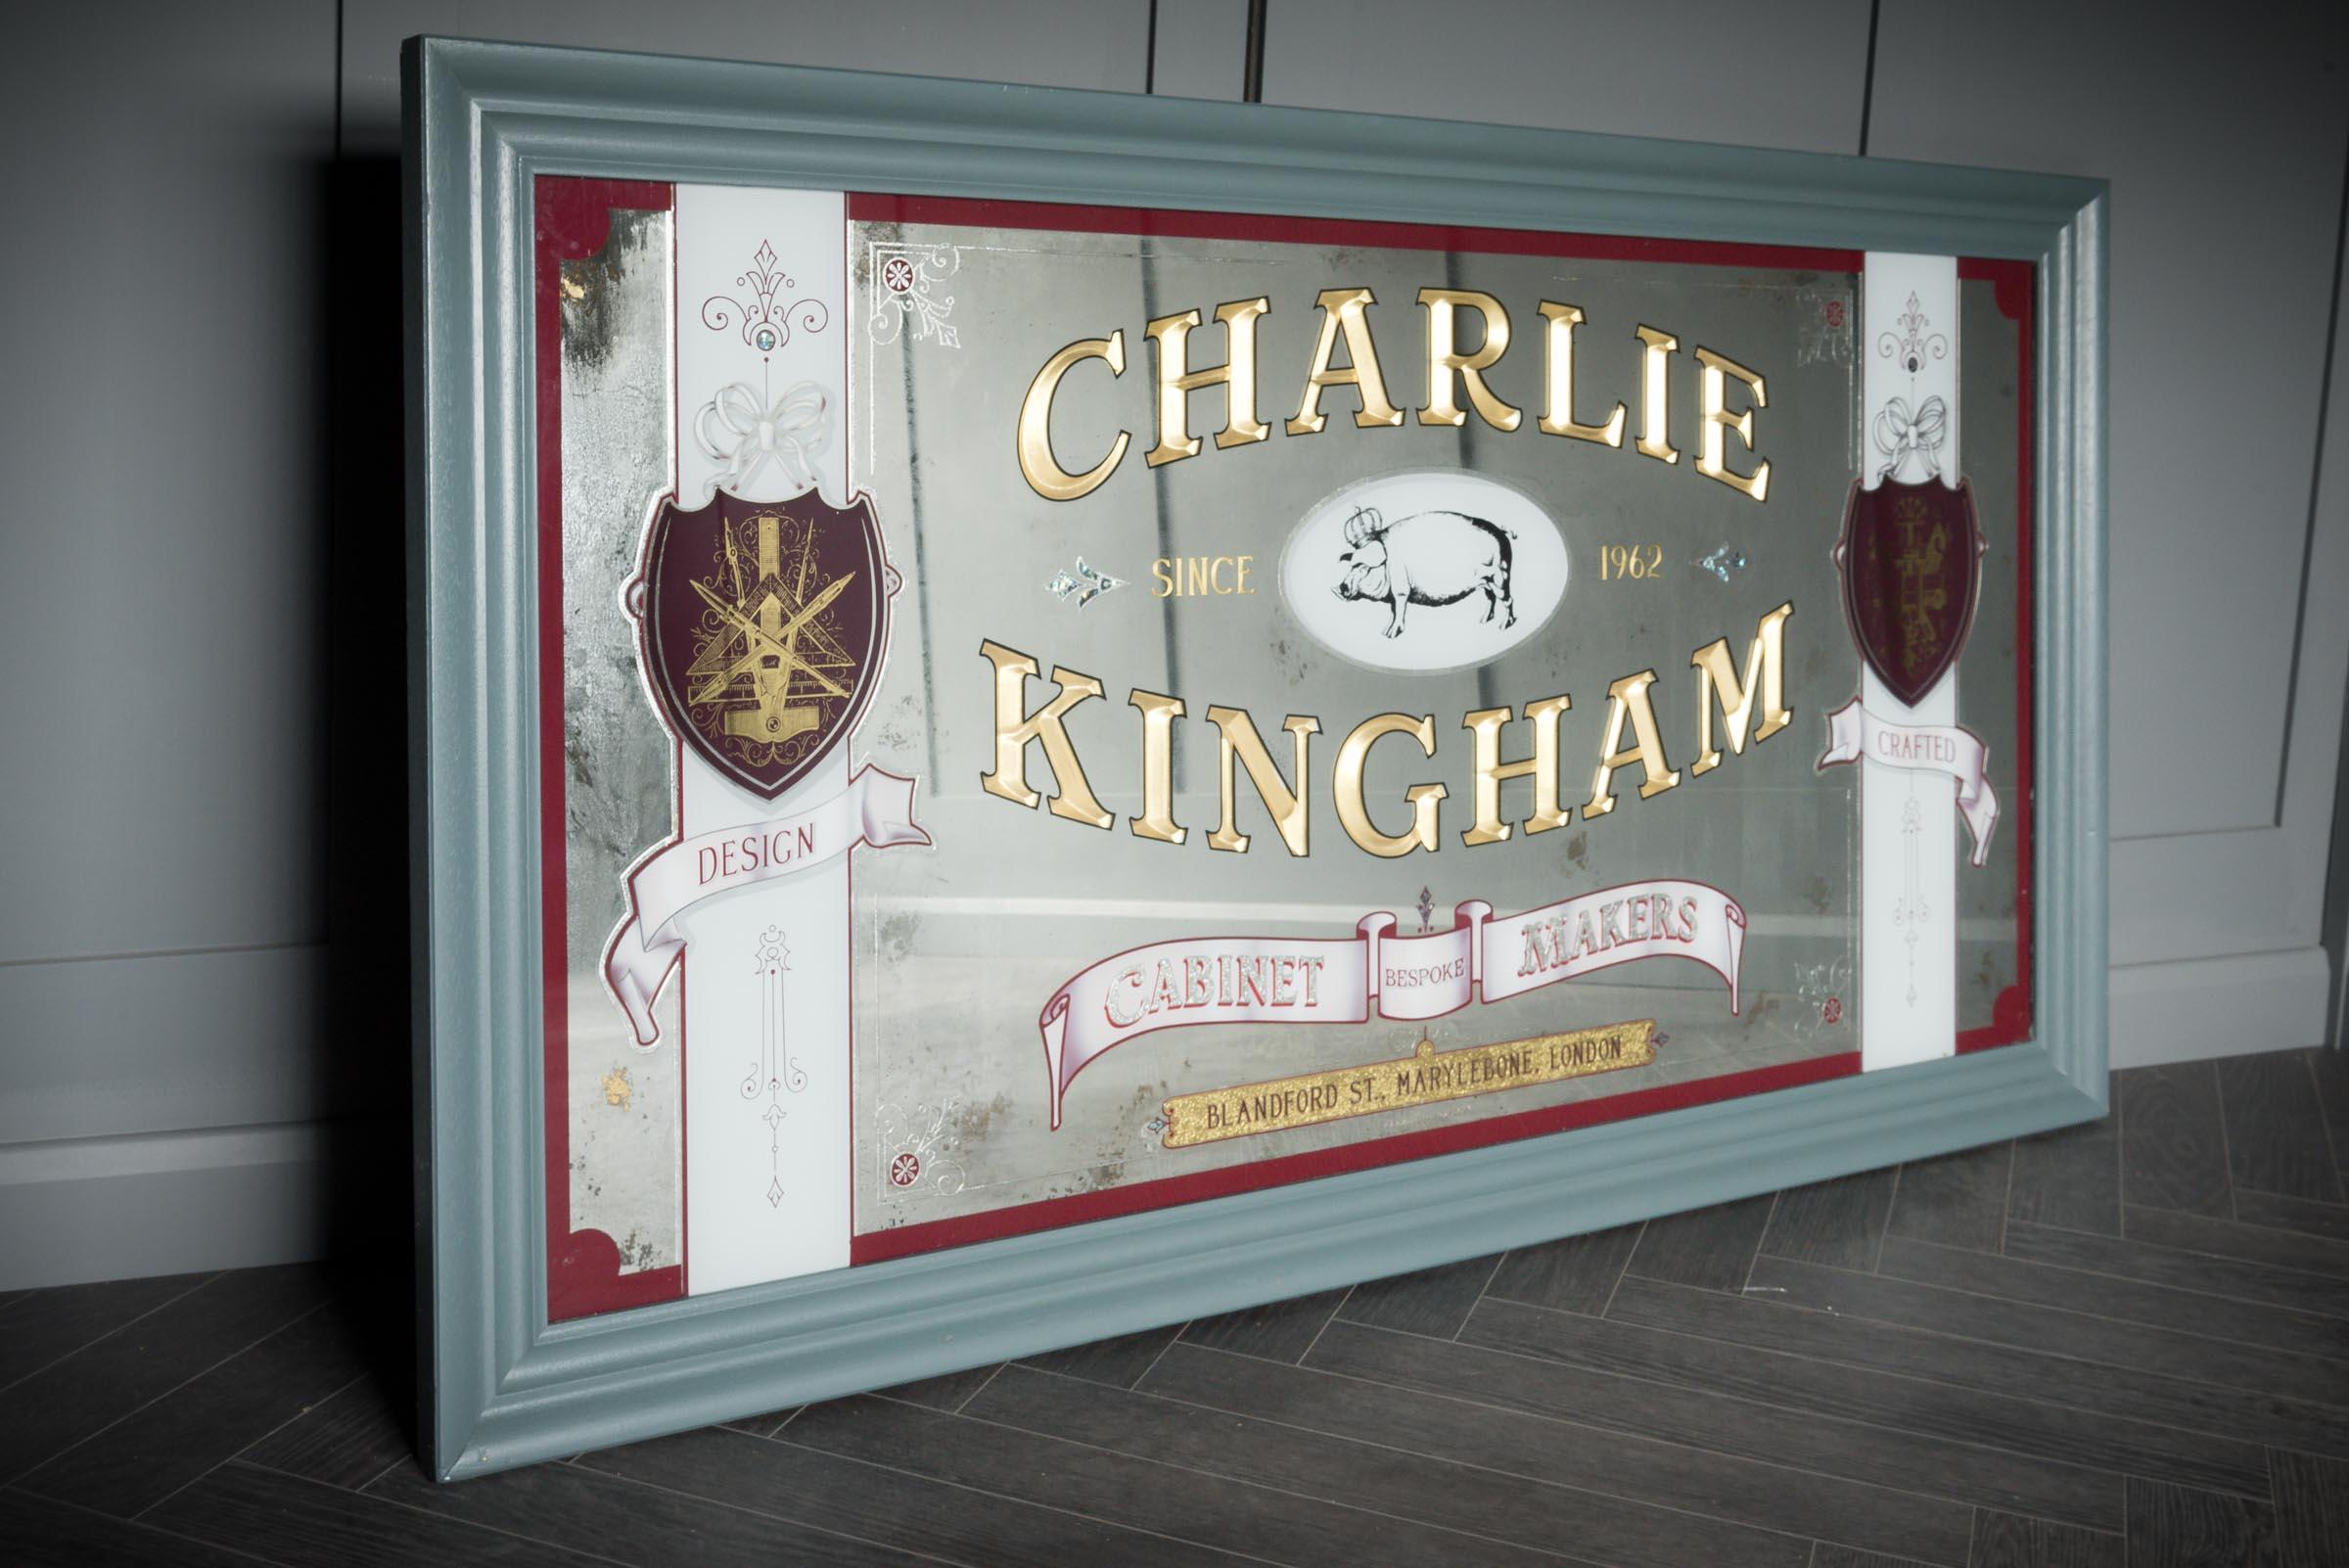 The original signing from the first Charlie Kingham Cabinetmakers shop in Marylebone, London. An imposing mirrored sign with stunning lettering which would brighten up any space and could look particularly wonderful on the wall of a restaurant or